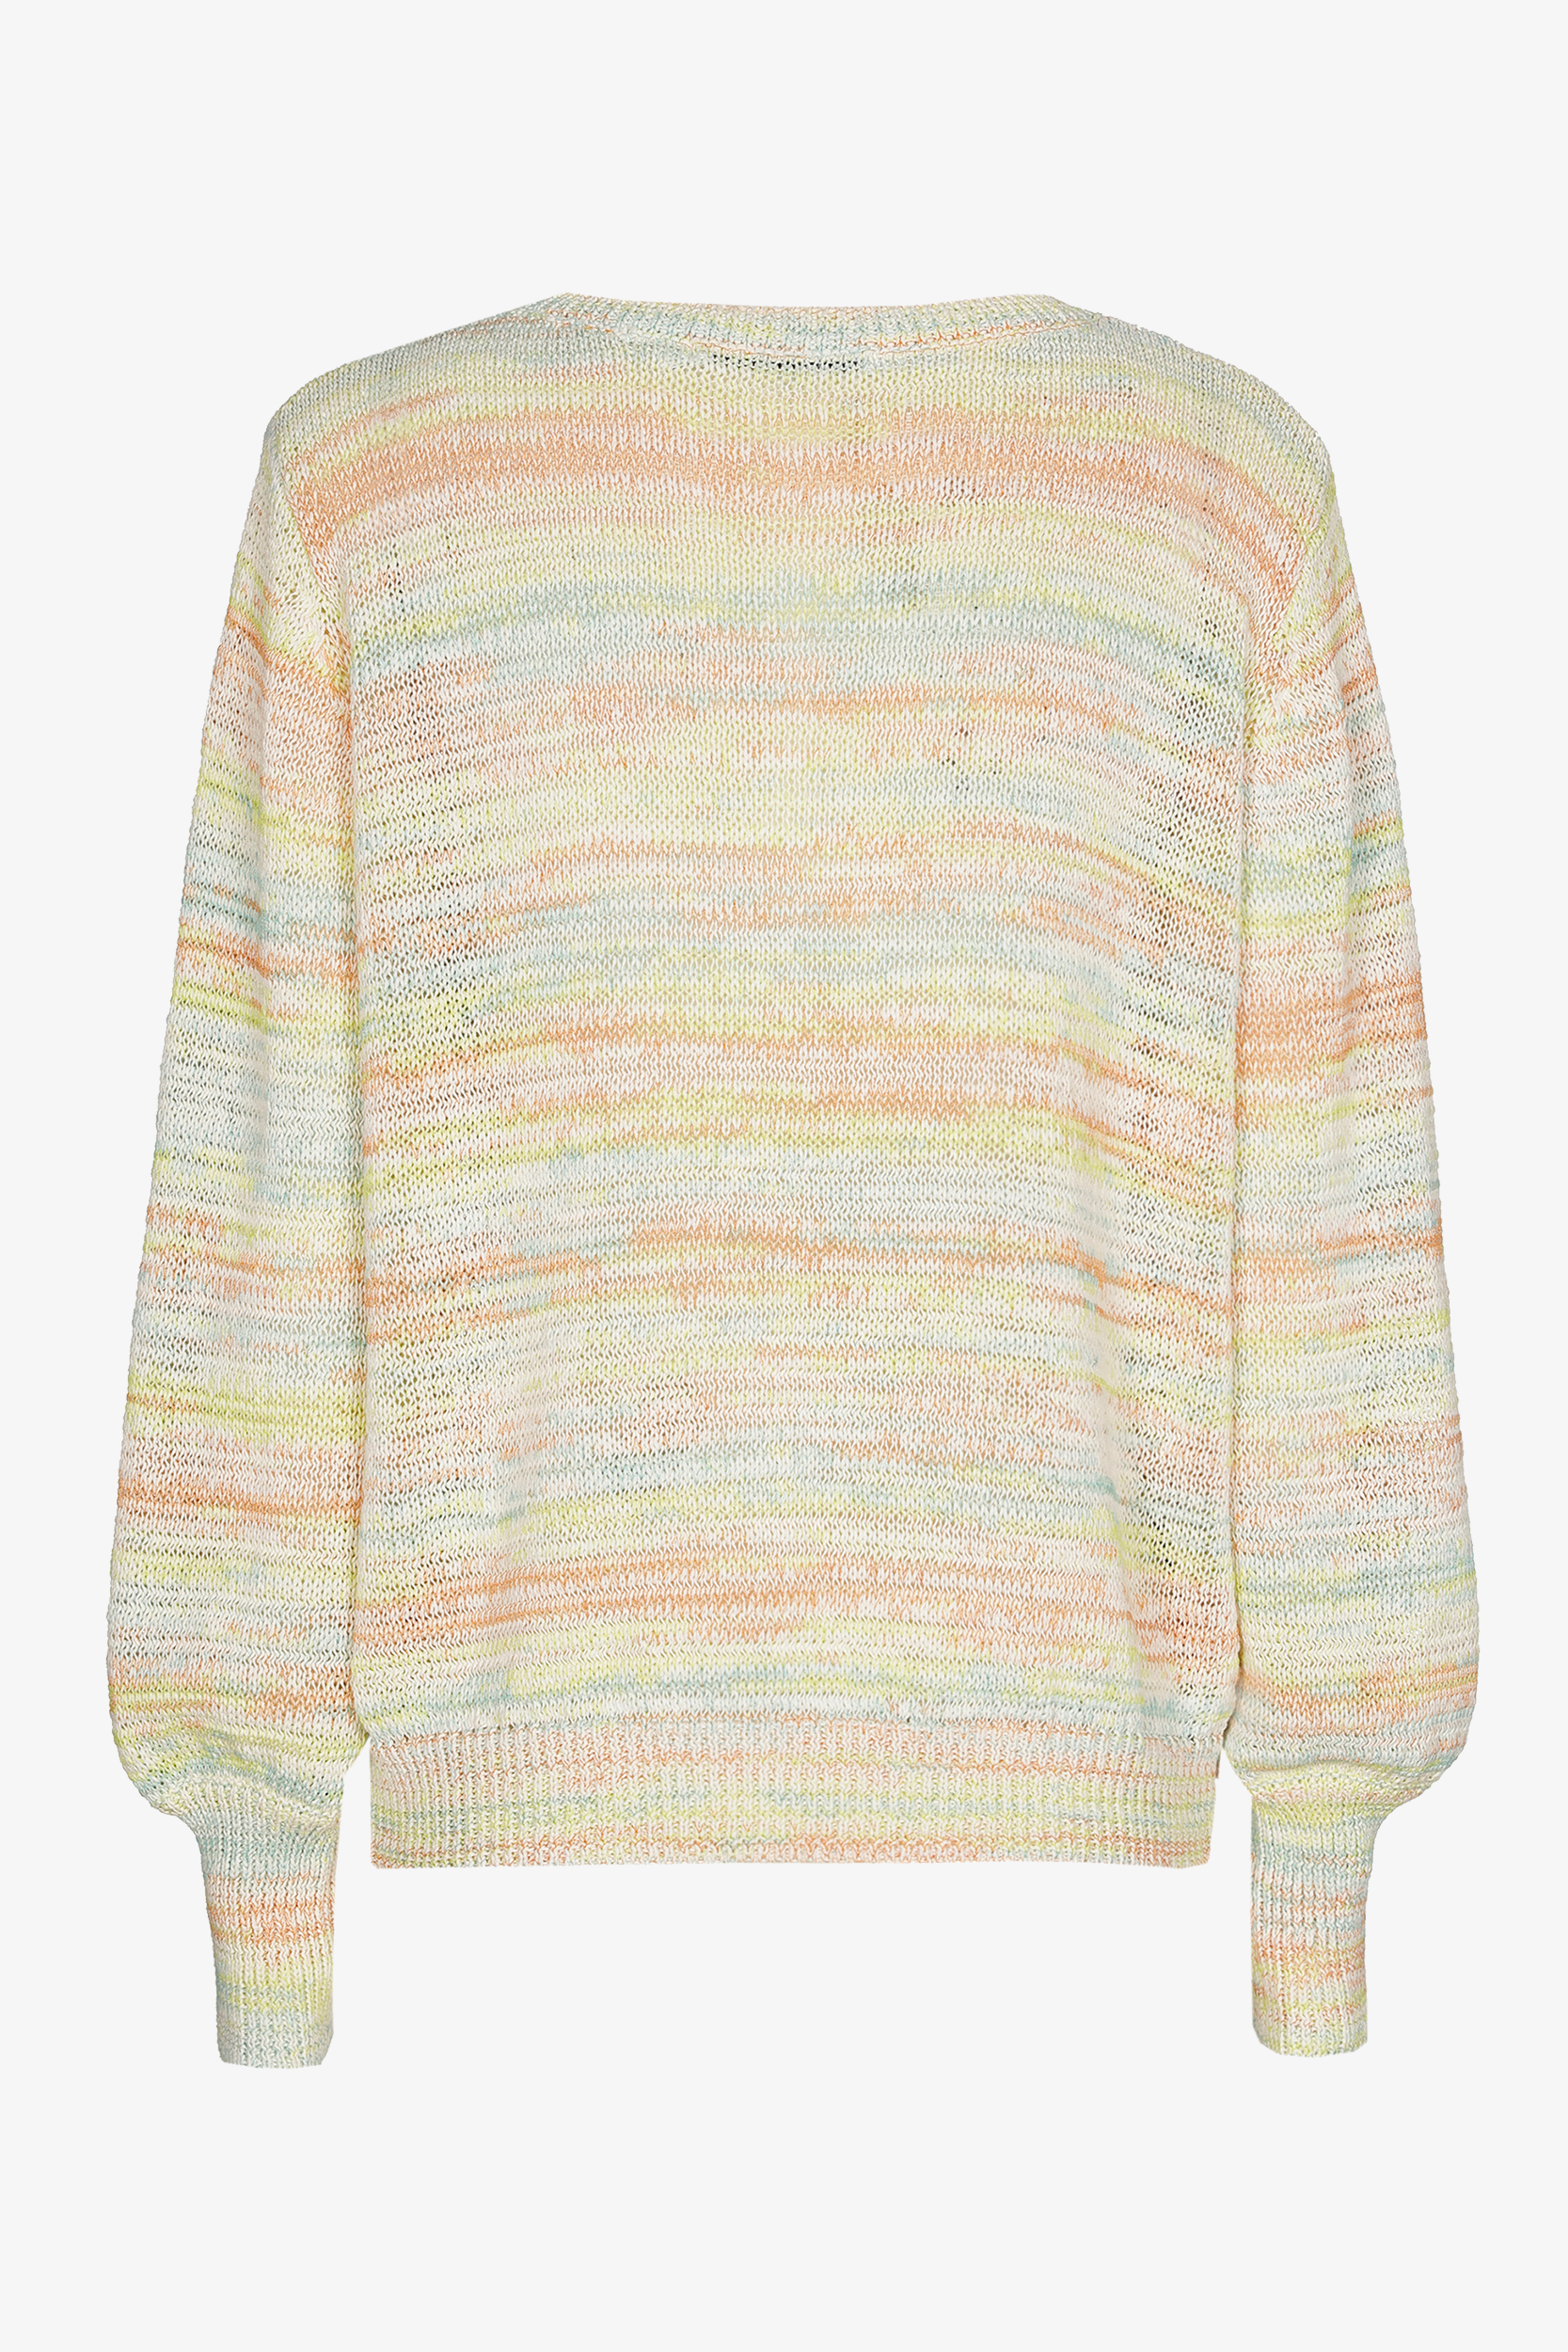 Multicoloured knitted jumper